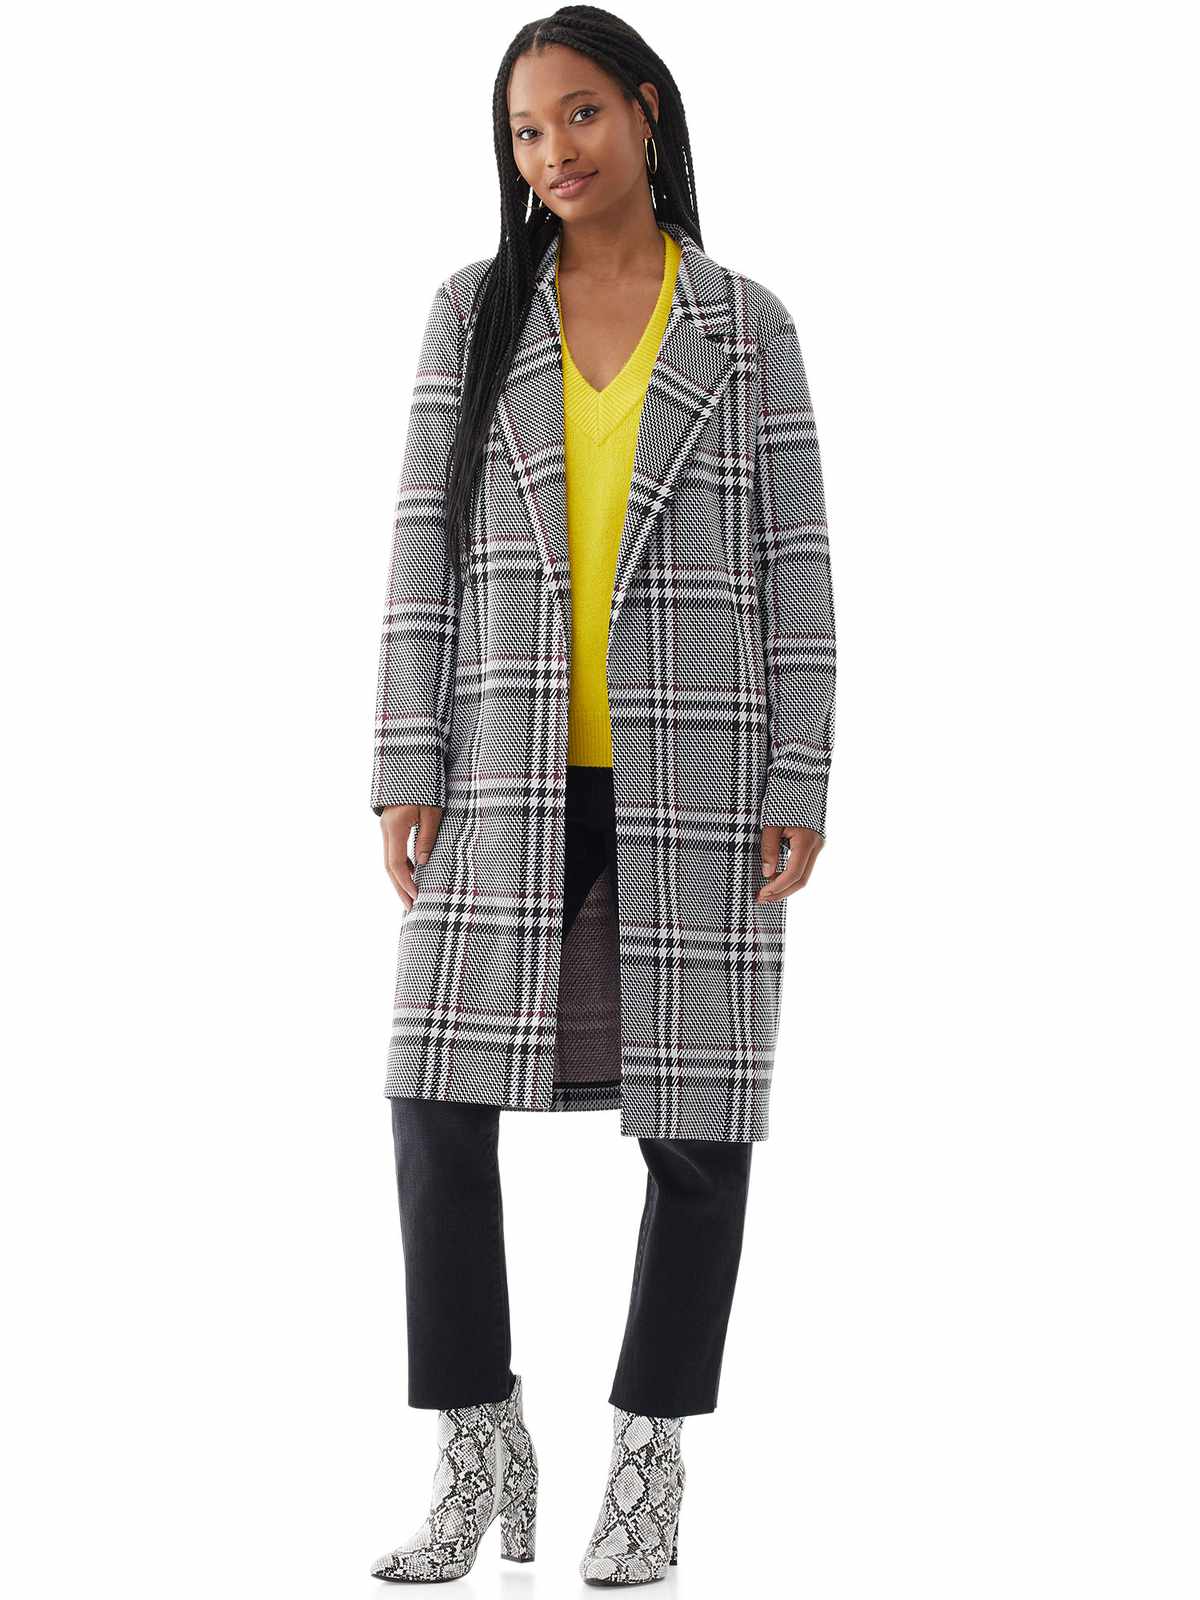 Walmart Scoop Fall Fashion Collection